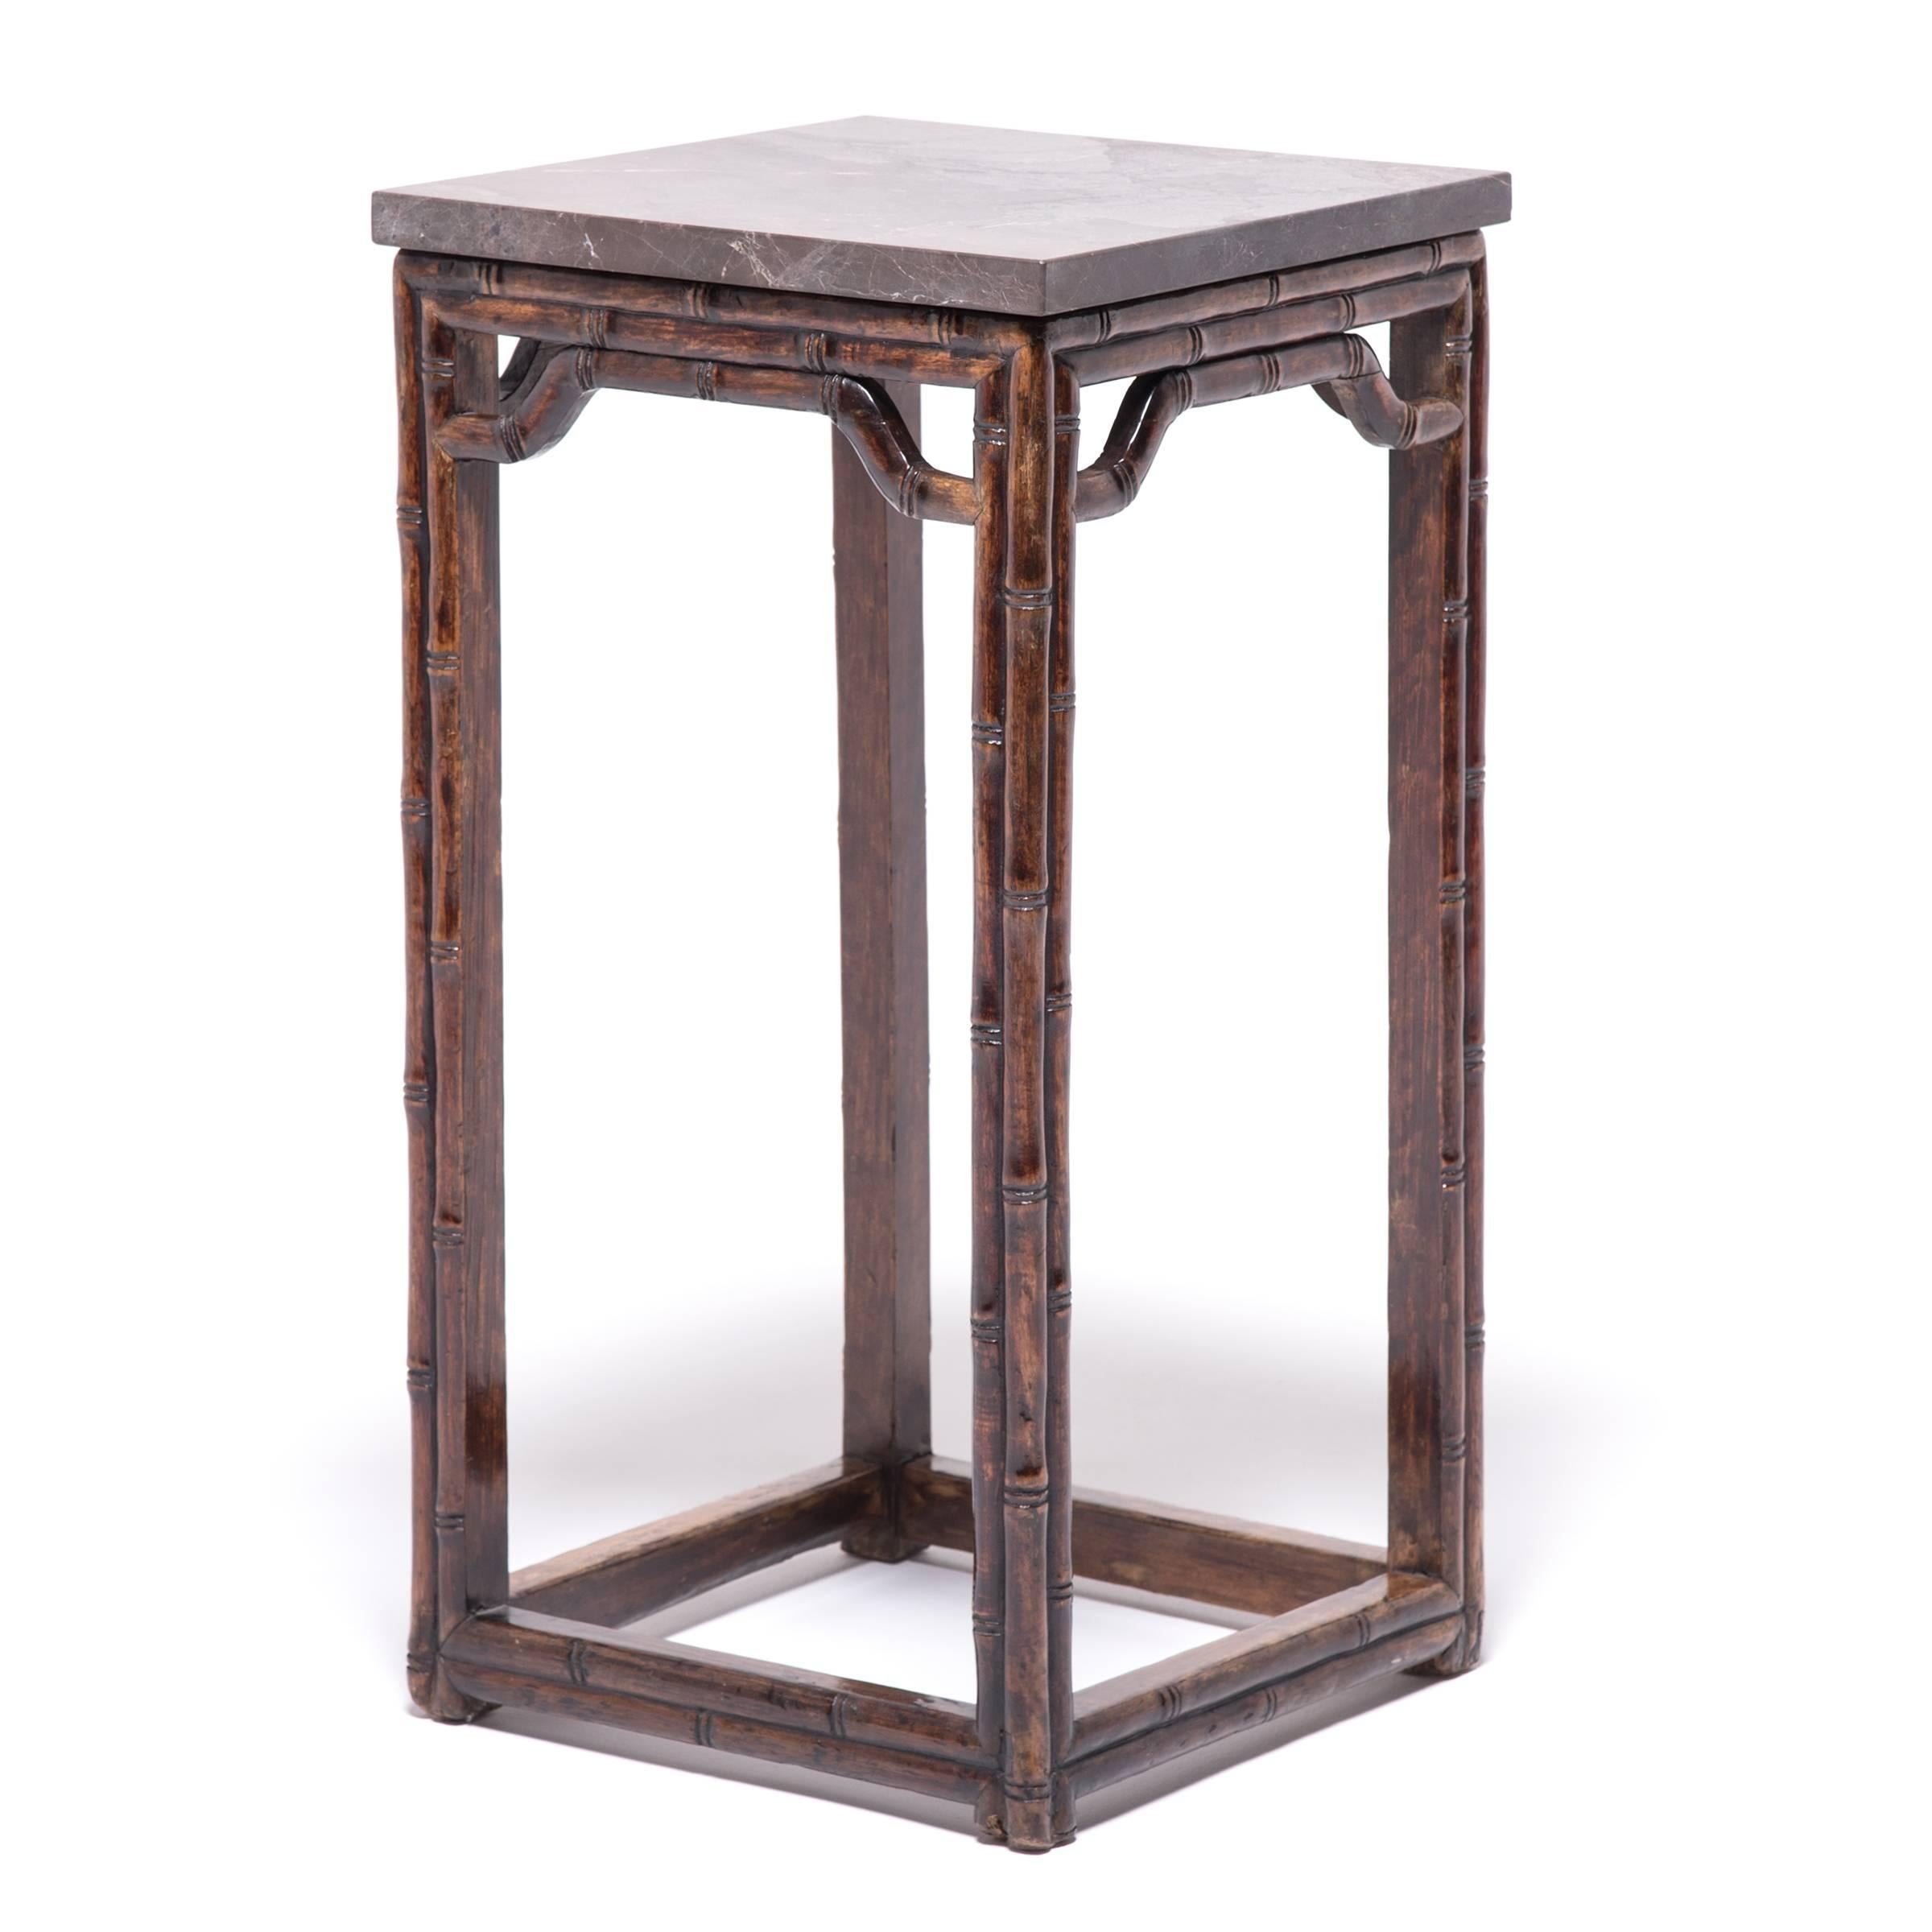 Sculpted by a 19th century carpenter to resemble bamboo, this fruitwood tea table expresses the virtuous characteristics of bamboo, integrity, strength, and perseverance. First popularized in the 17th century, this style emulates bamboo furniture